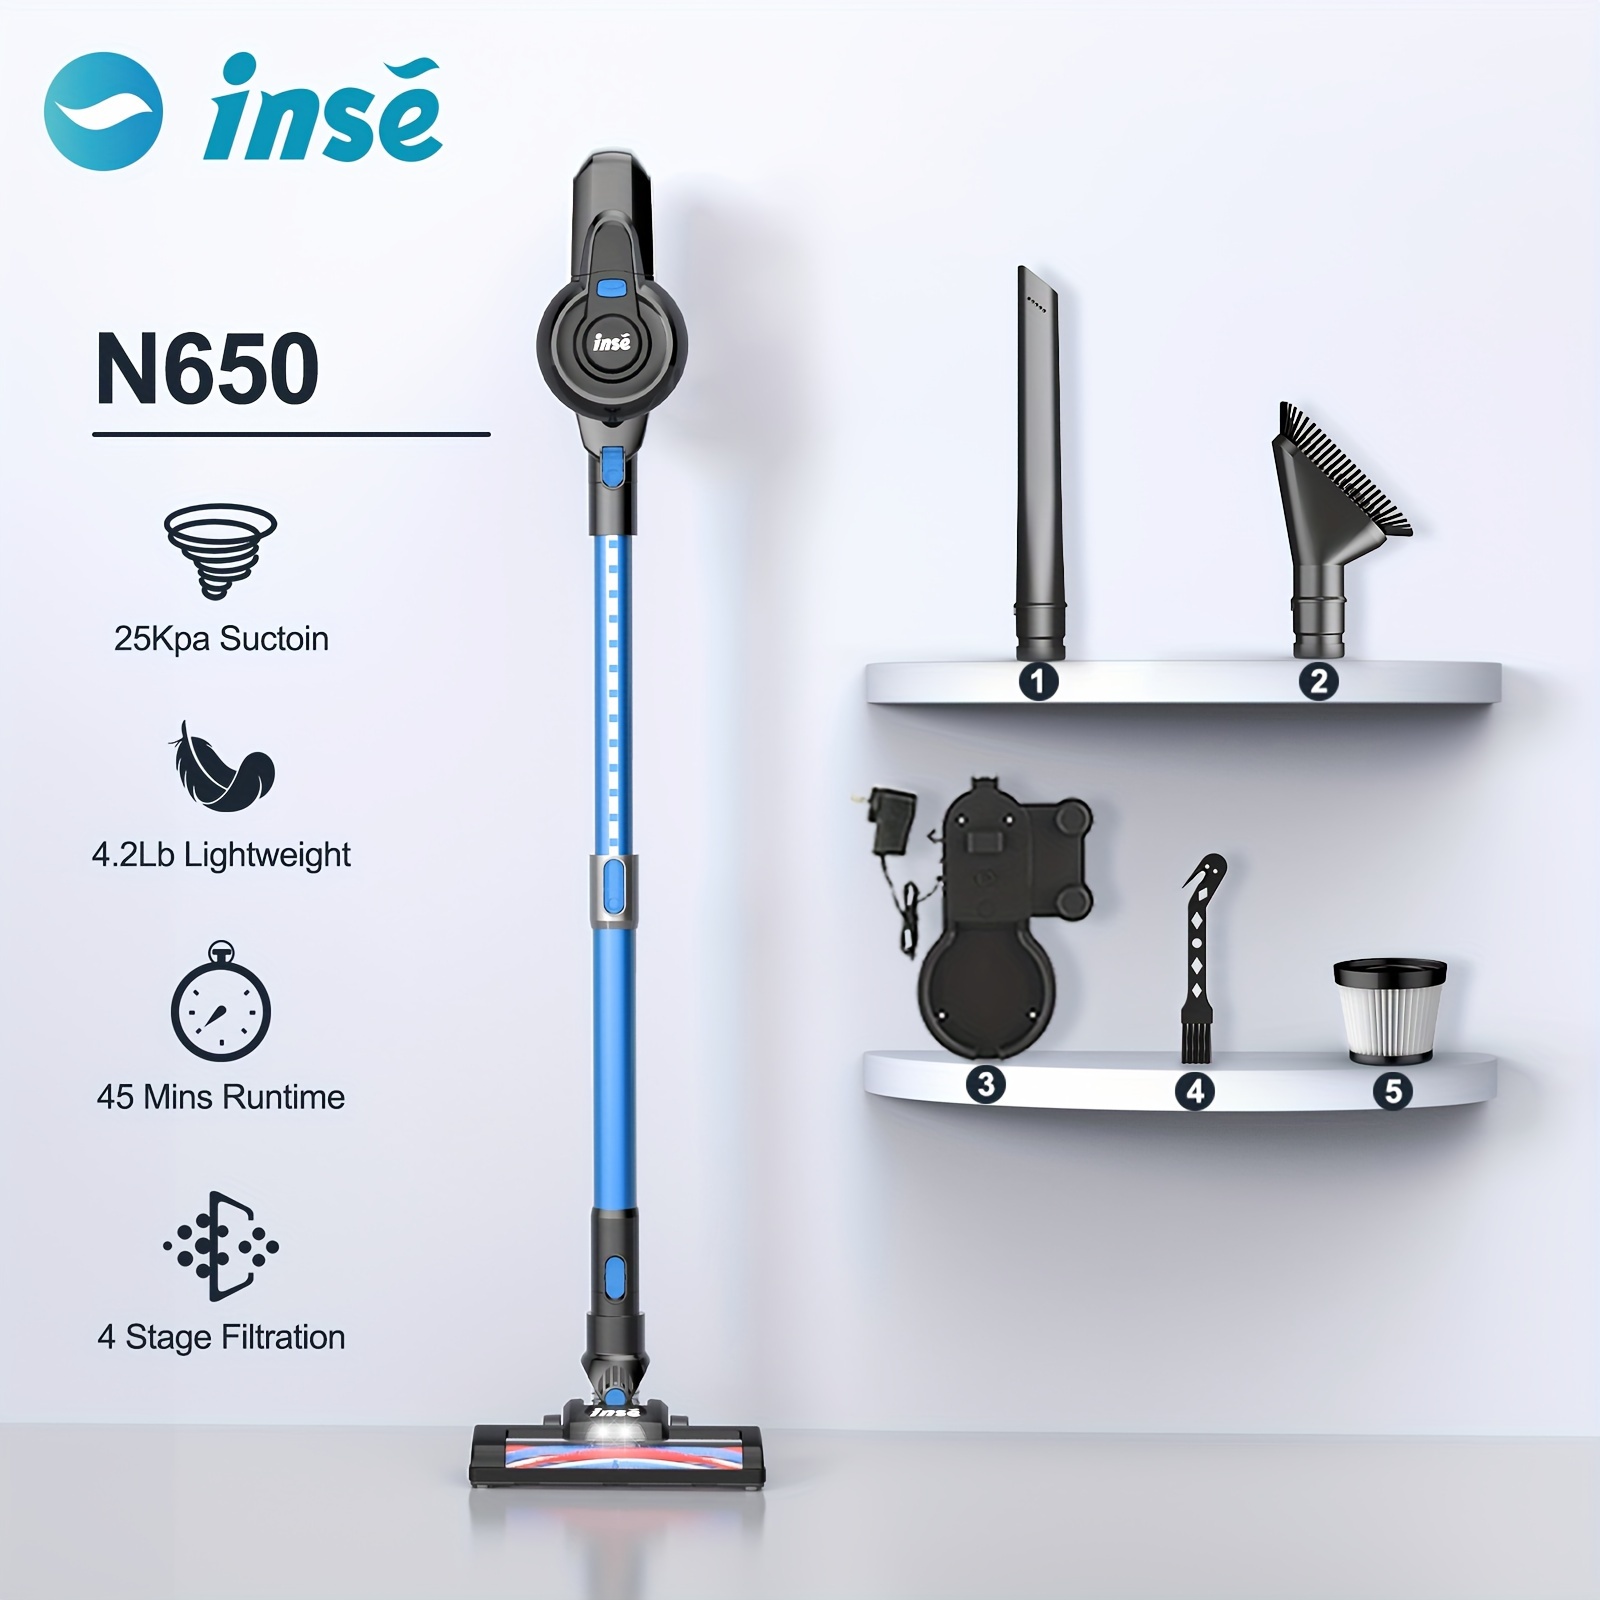 

Cordless Vacuum Cleaner N650, 6-in-1 Powerful Stick Vacuum, Cleaner With 2200mah Battery Up To 45 Mins Runtime, Lightweight Handheld Vacuum For Home Hard Floor Carpet Pet Hair